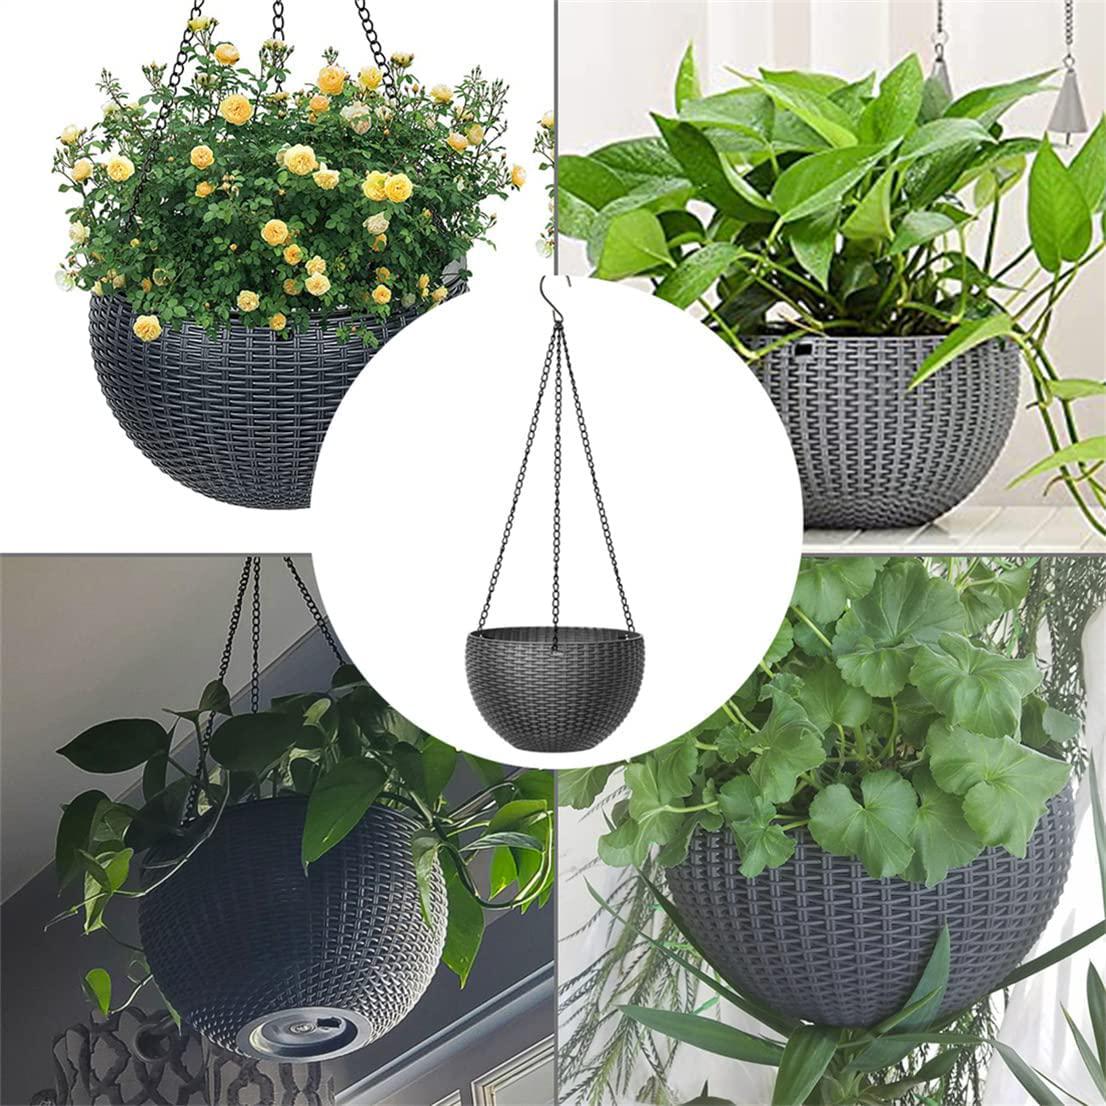 Hanging Basket Planters Plastic Hanging Baskets Flower Pot Plant Holder Hanging Planters Baskets Plants Pot Container with Chain for Indoor Outdoor Plants Garden Porch Balcony Décor